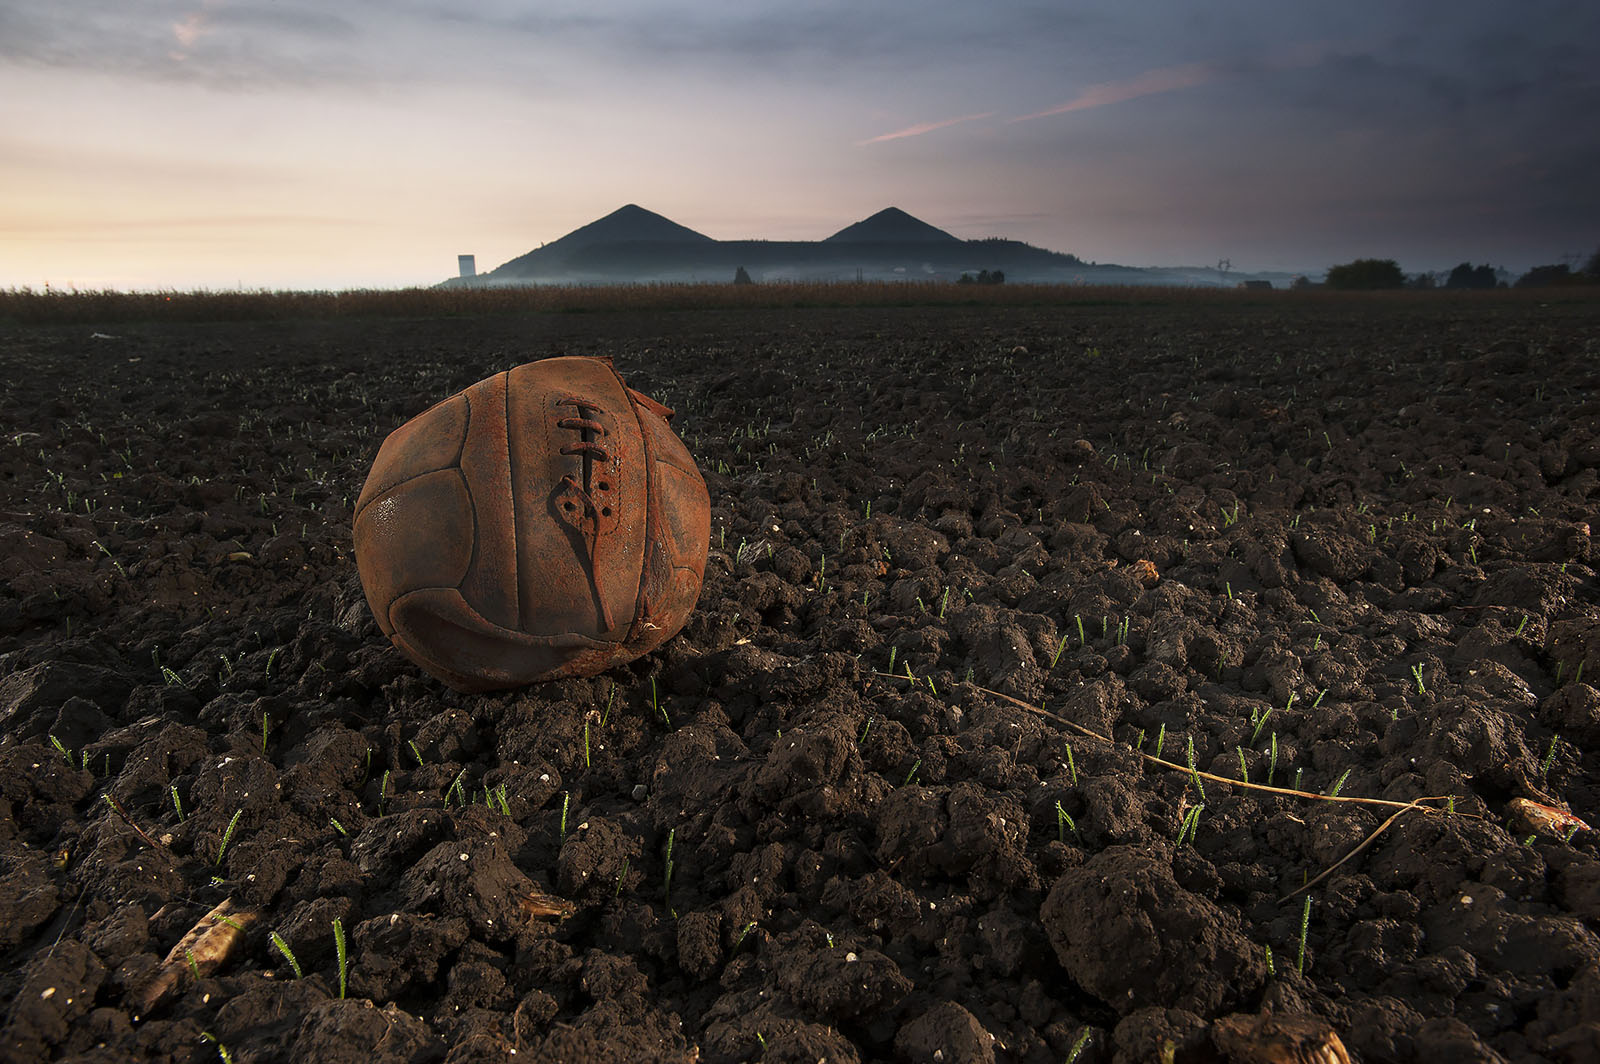 Modern photograph of a field of cracked dirt. A deflated brown football/soccer ball sits in the foreground.